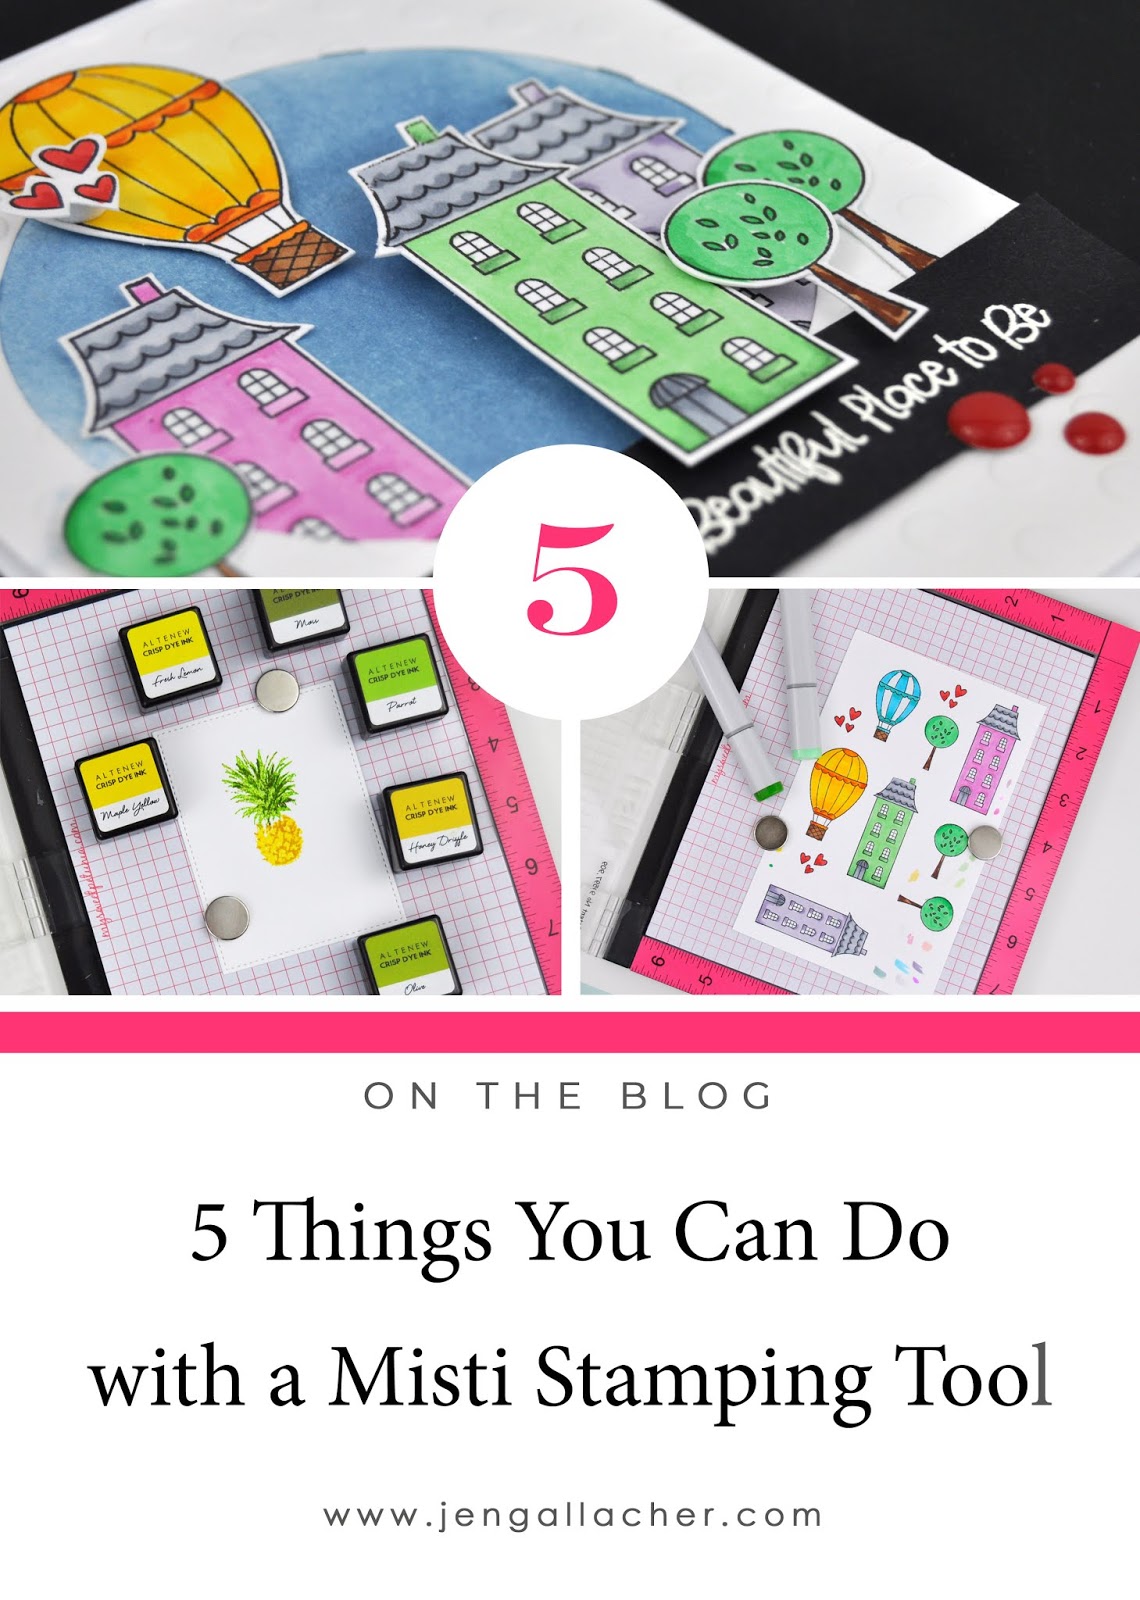 5 Amazing Things You Can Do with a Misti